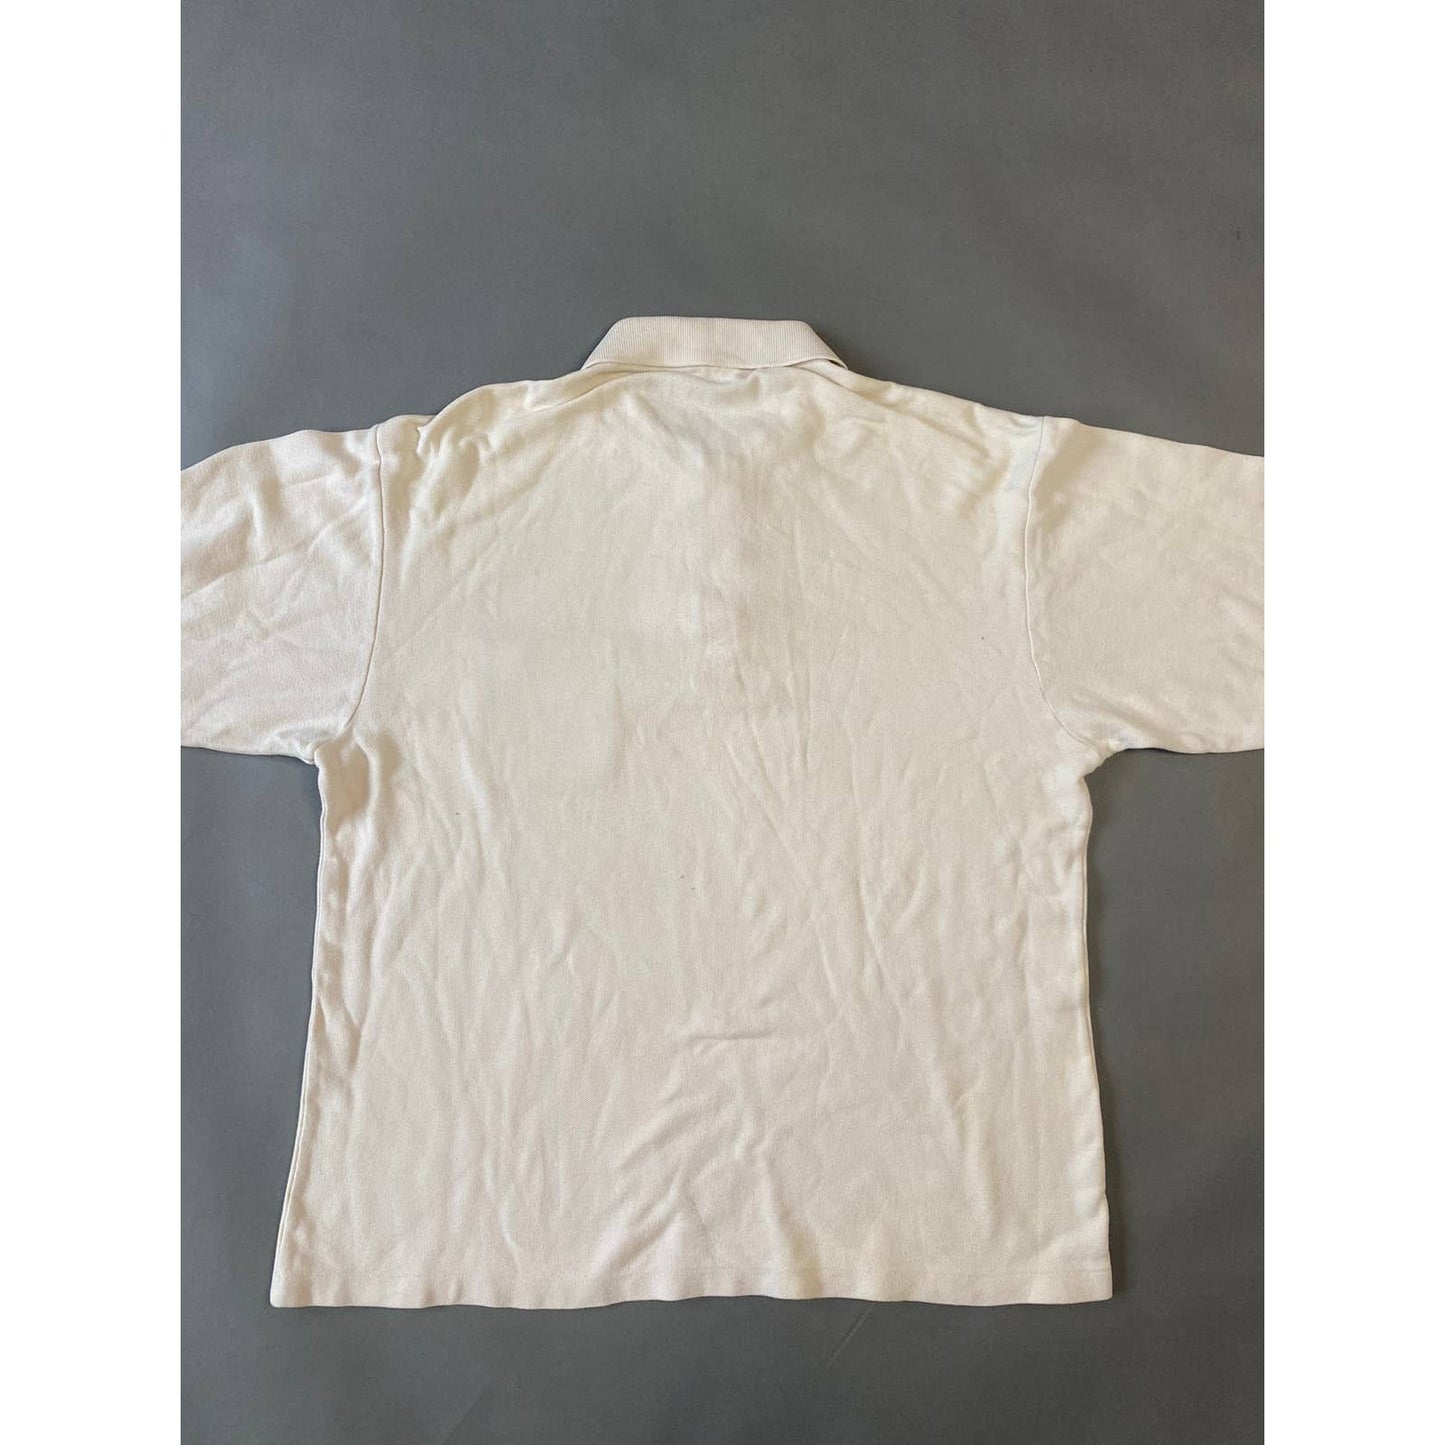 Lacoste vintage cream long sleeve polo t-shirt rugby